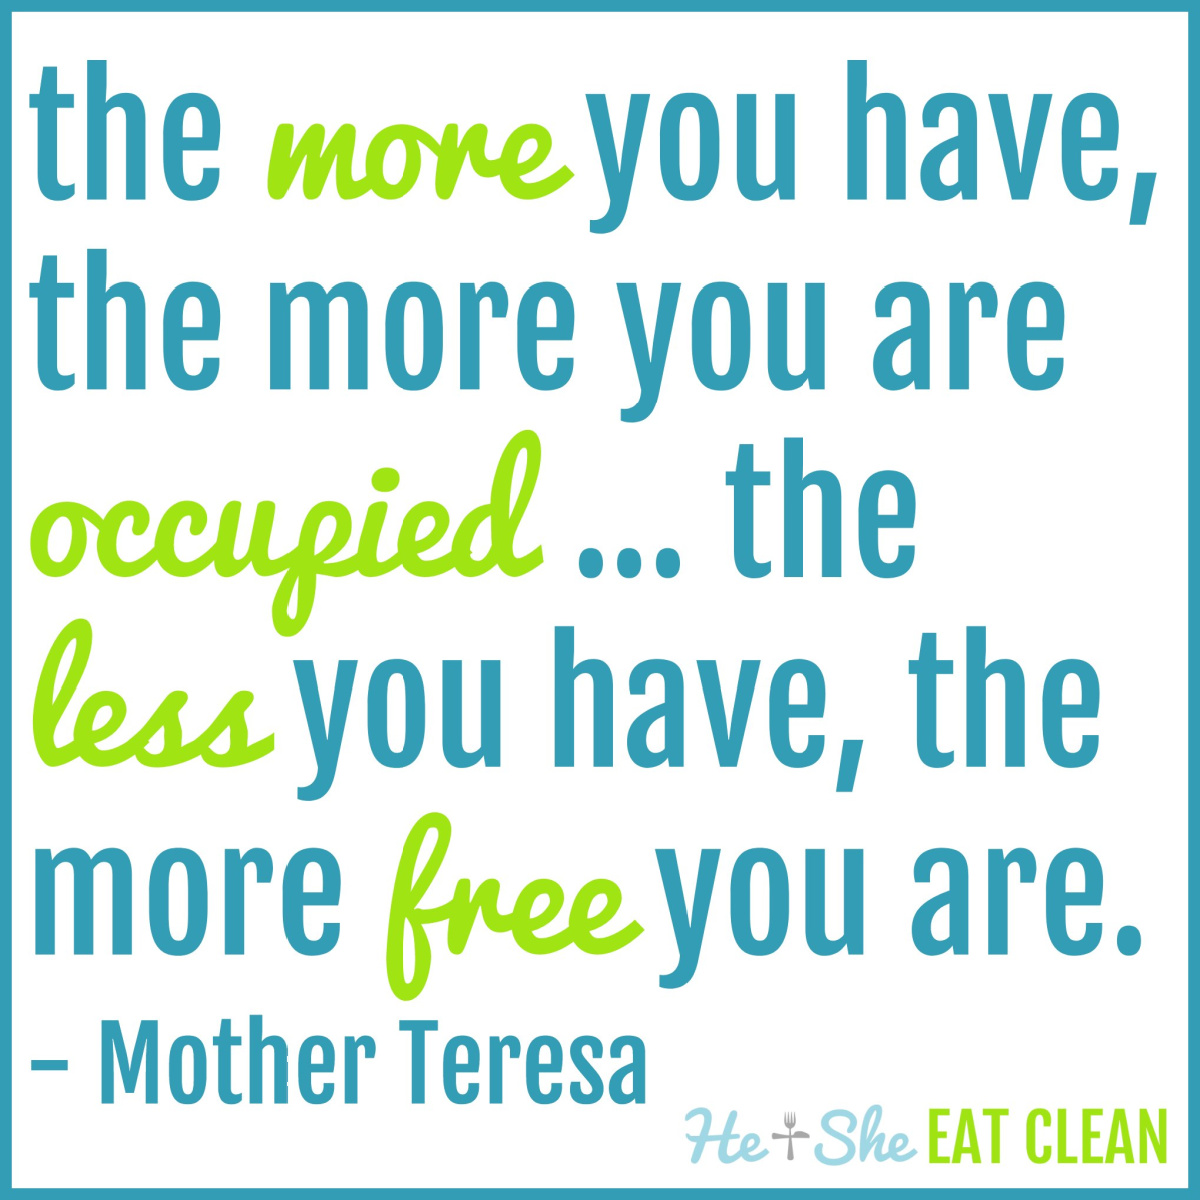 text reads the more you have, the more you are occupied ... the less you have, the more free you are. - Mother Teresa